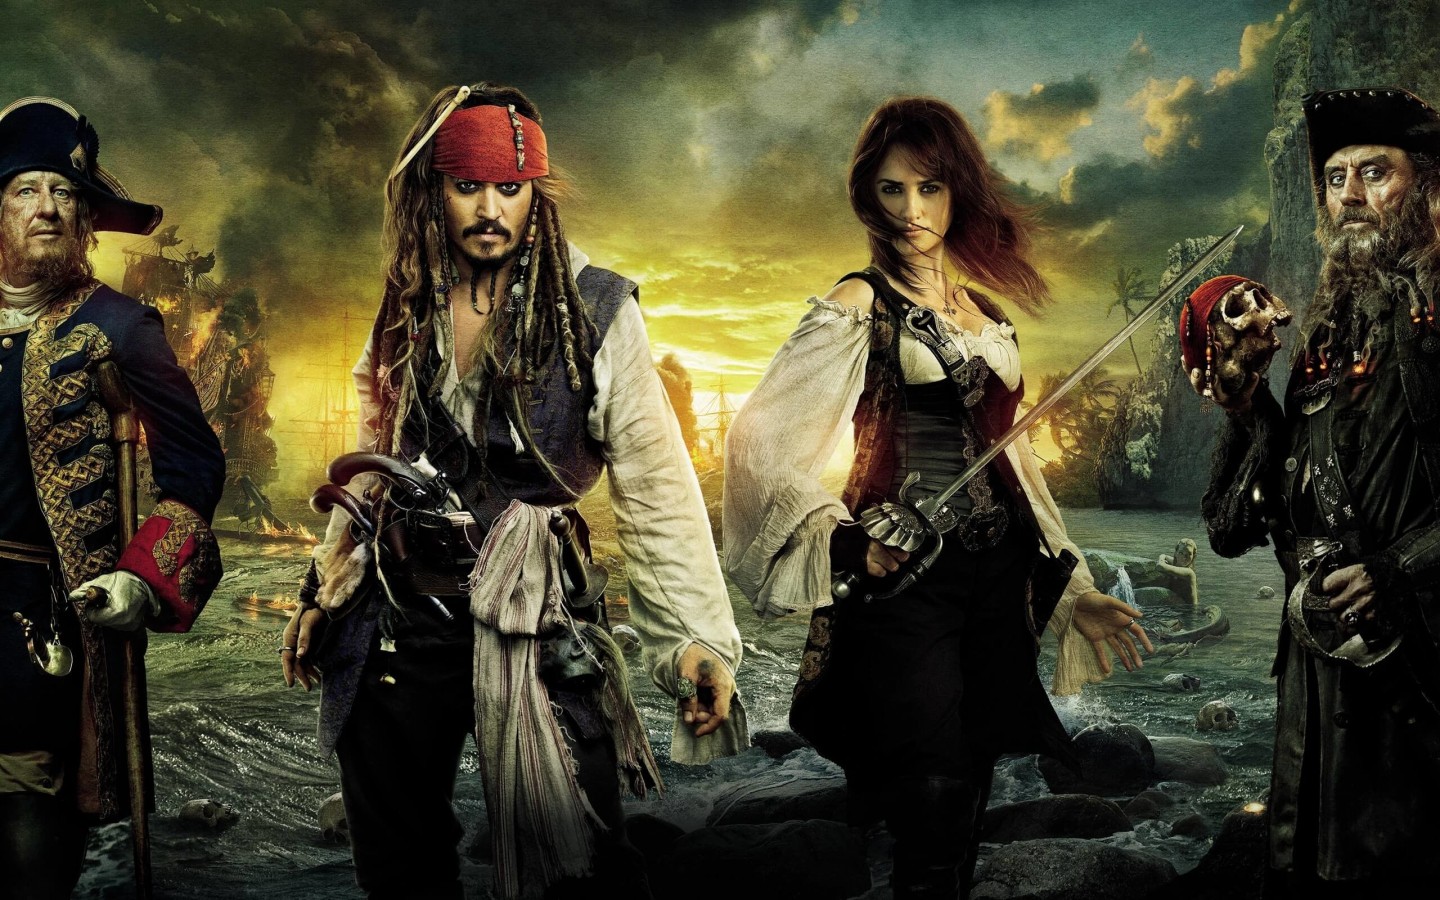 Pirates of the Caribbean: On Stranger Tides Characters Wallpaper for Desktop 1440x900